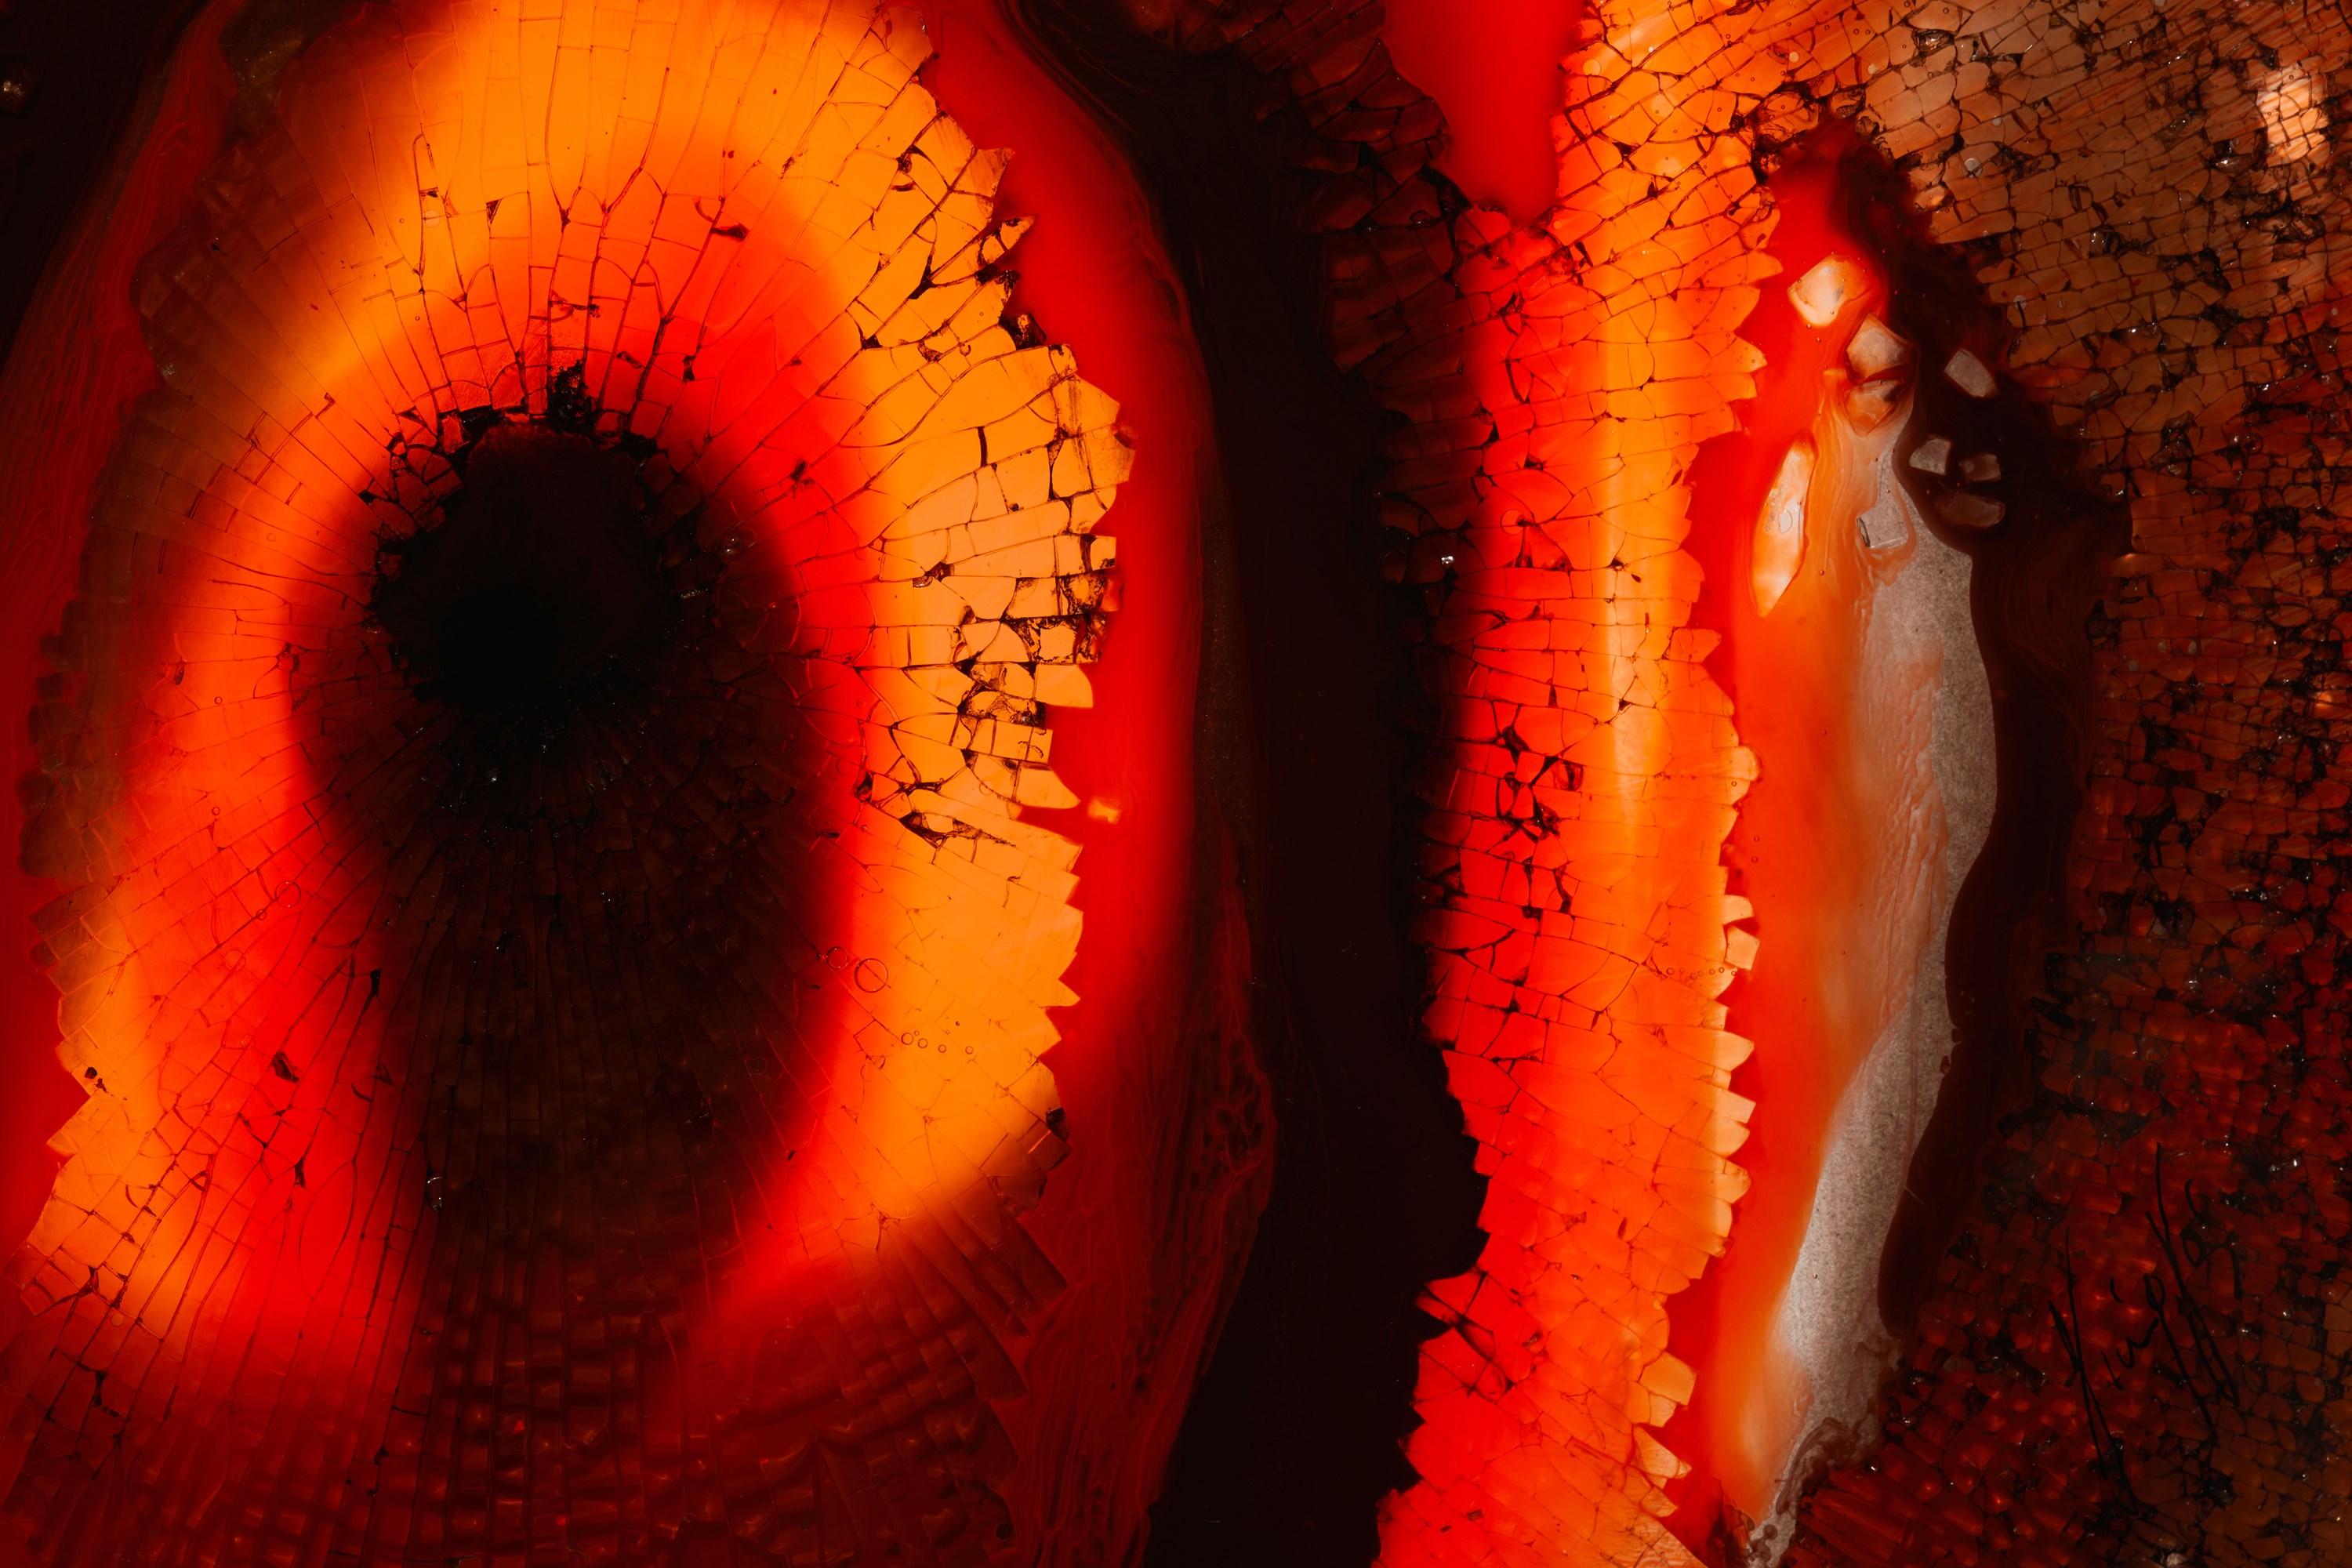 Cypriot Eye of Bravery, a Red & Black Abstract Glass Artwork by Yorgos Papadopoulos For Sale